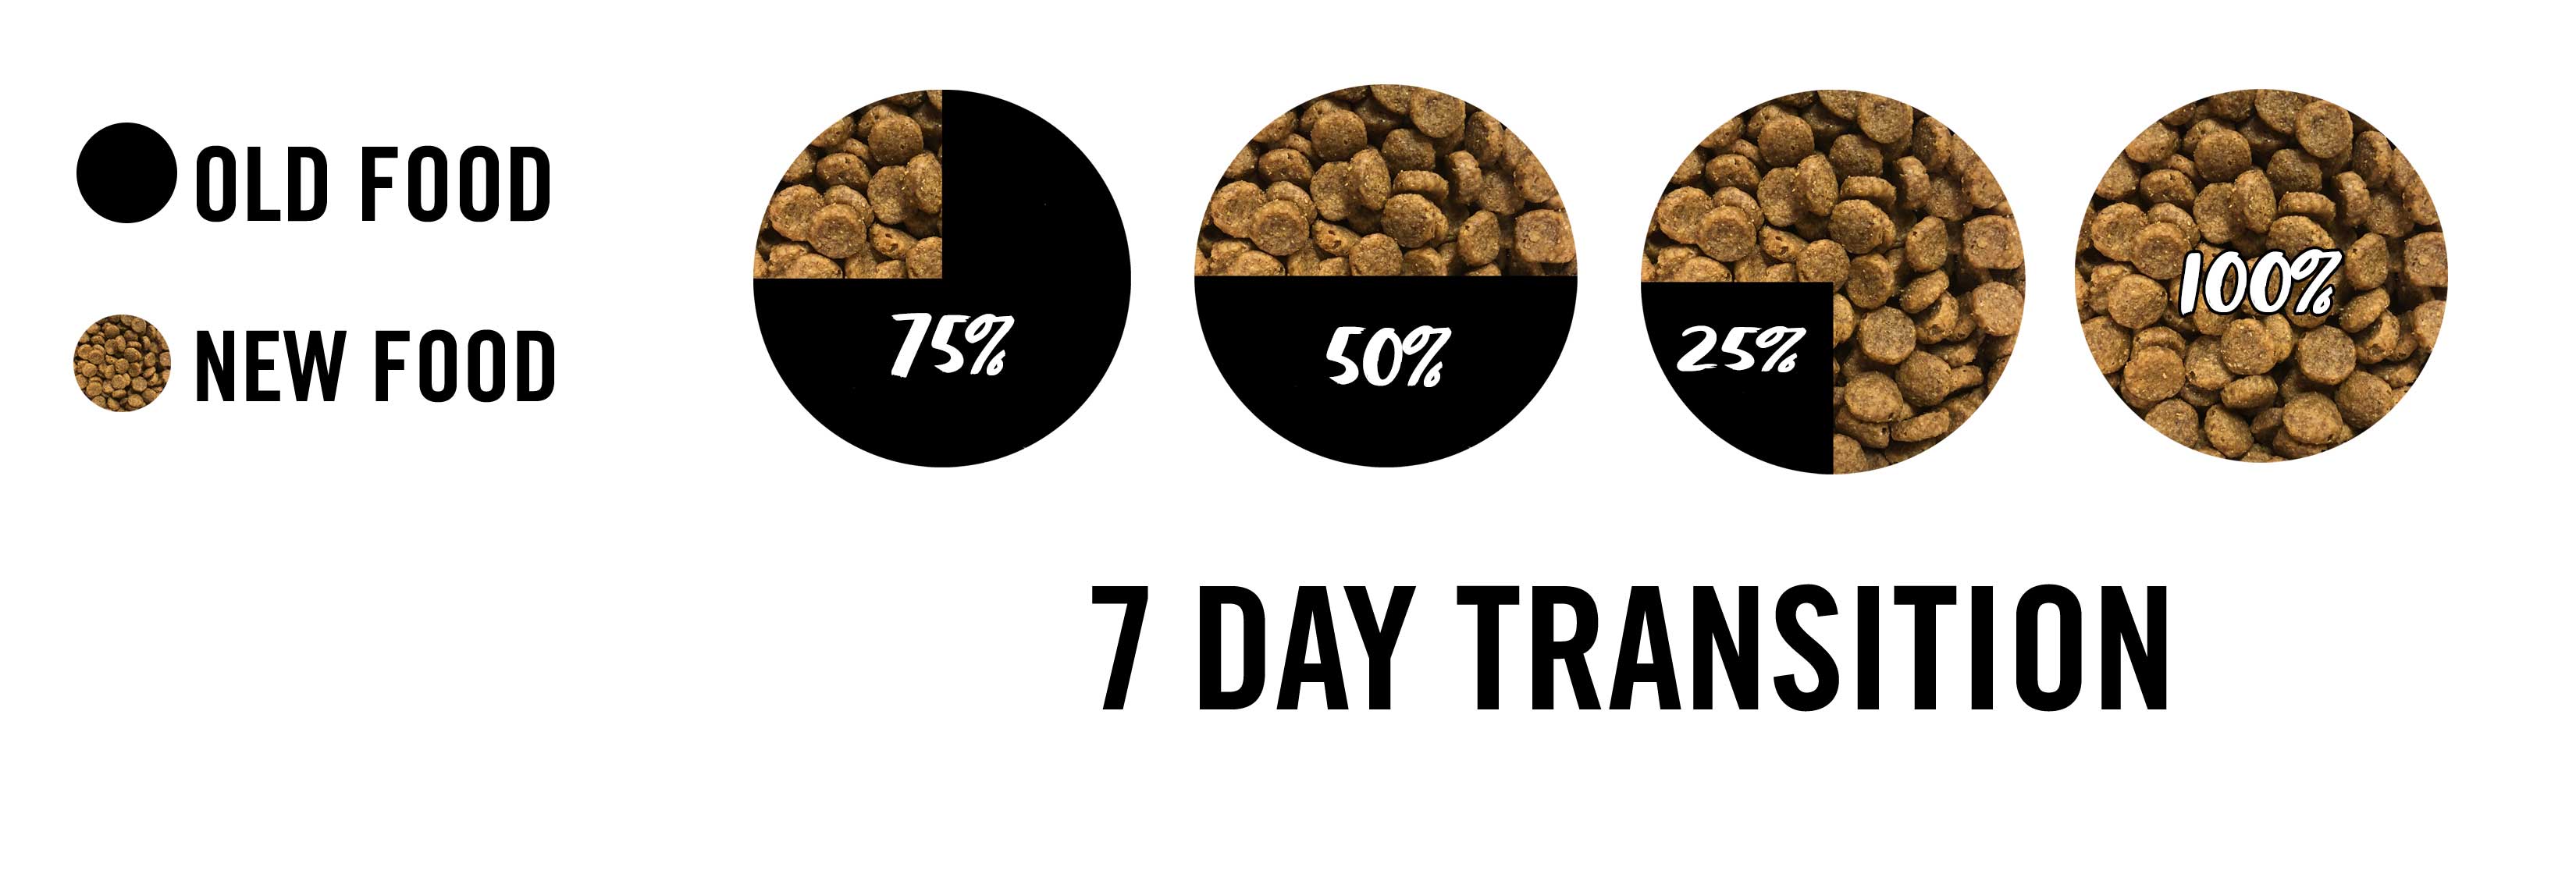 7 day pet food transition chart